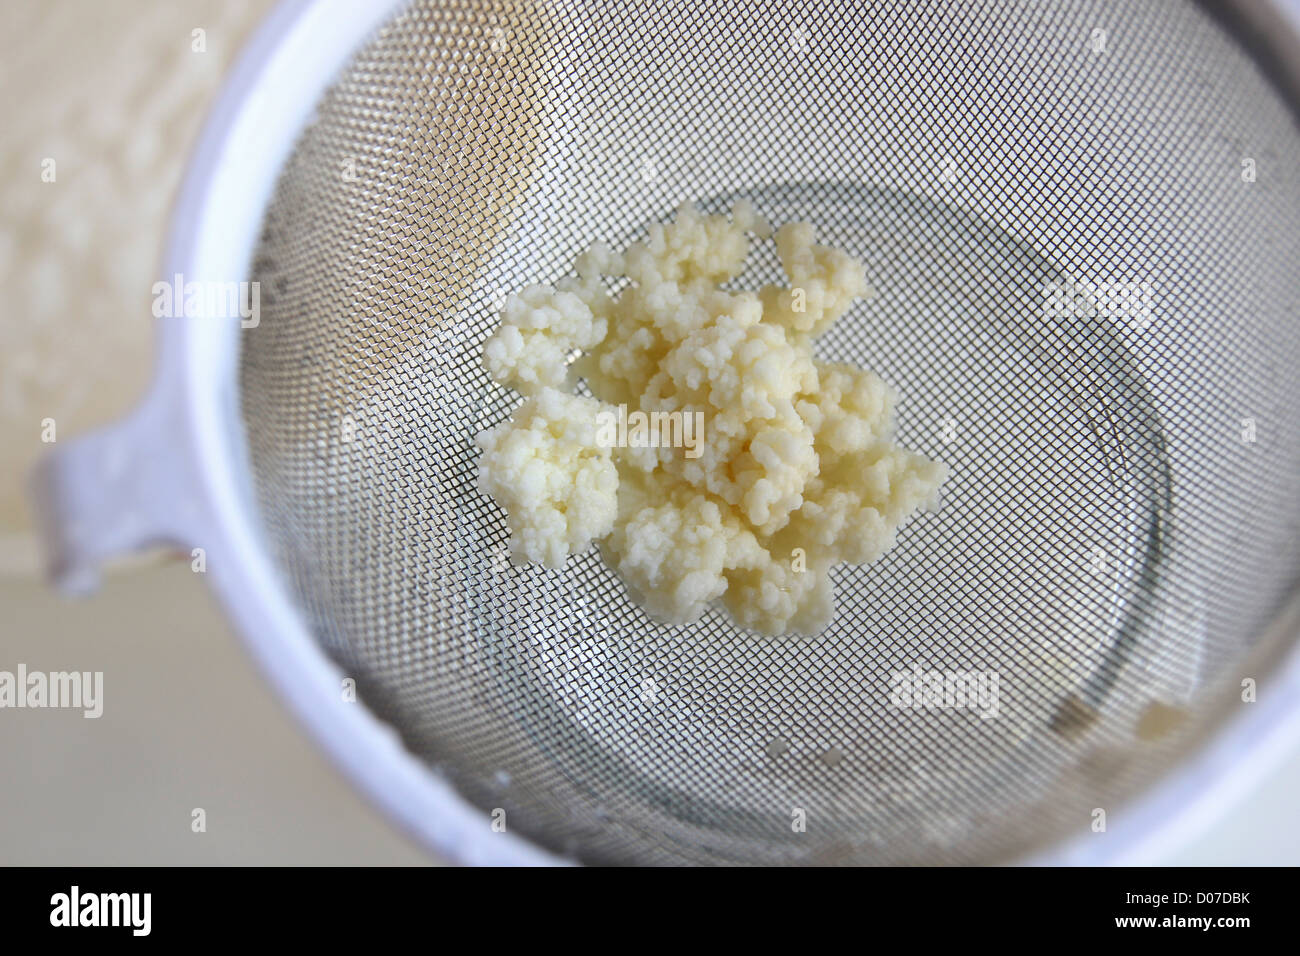 Kefir yoghurt plant grains in kitchen sieve, ready for use Stock Photo